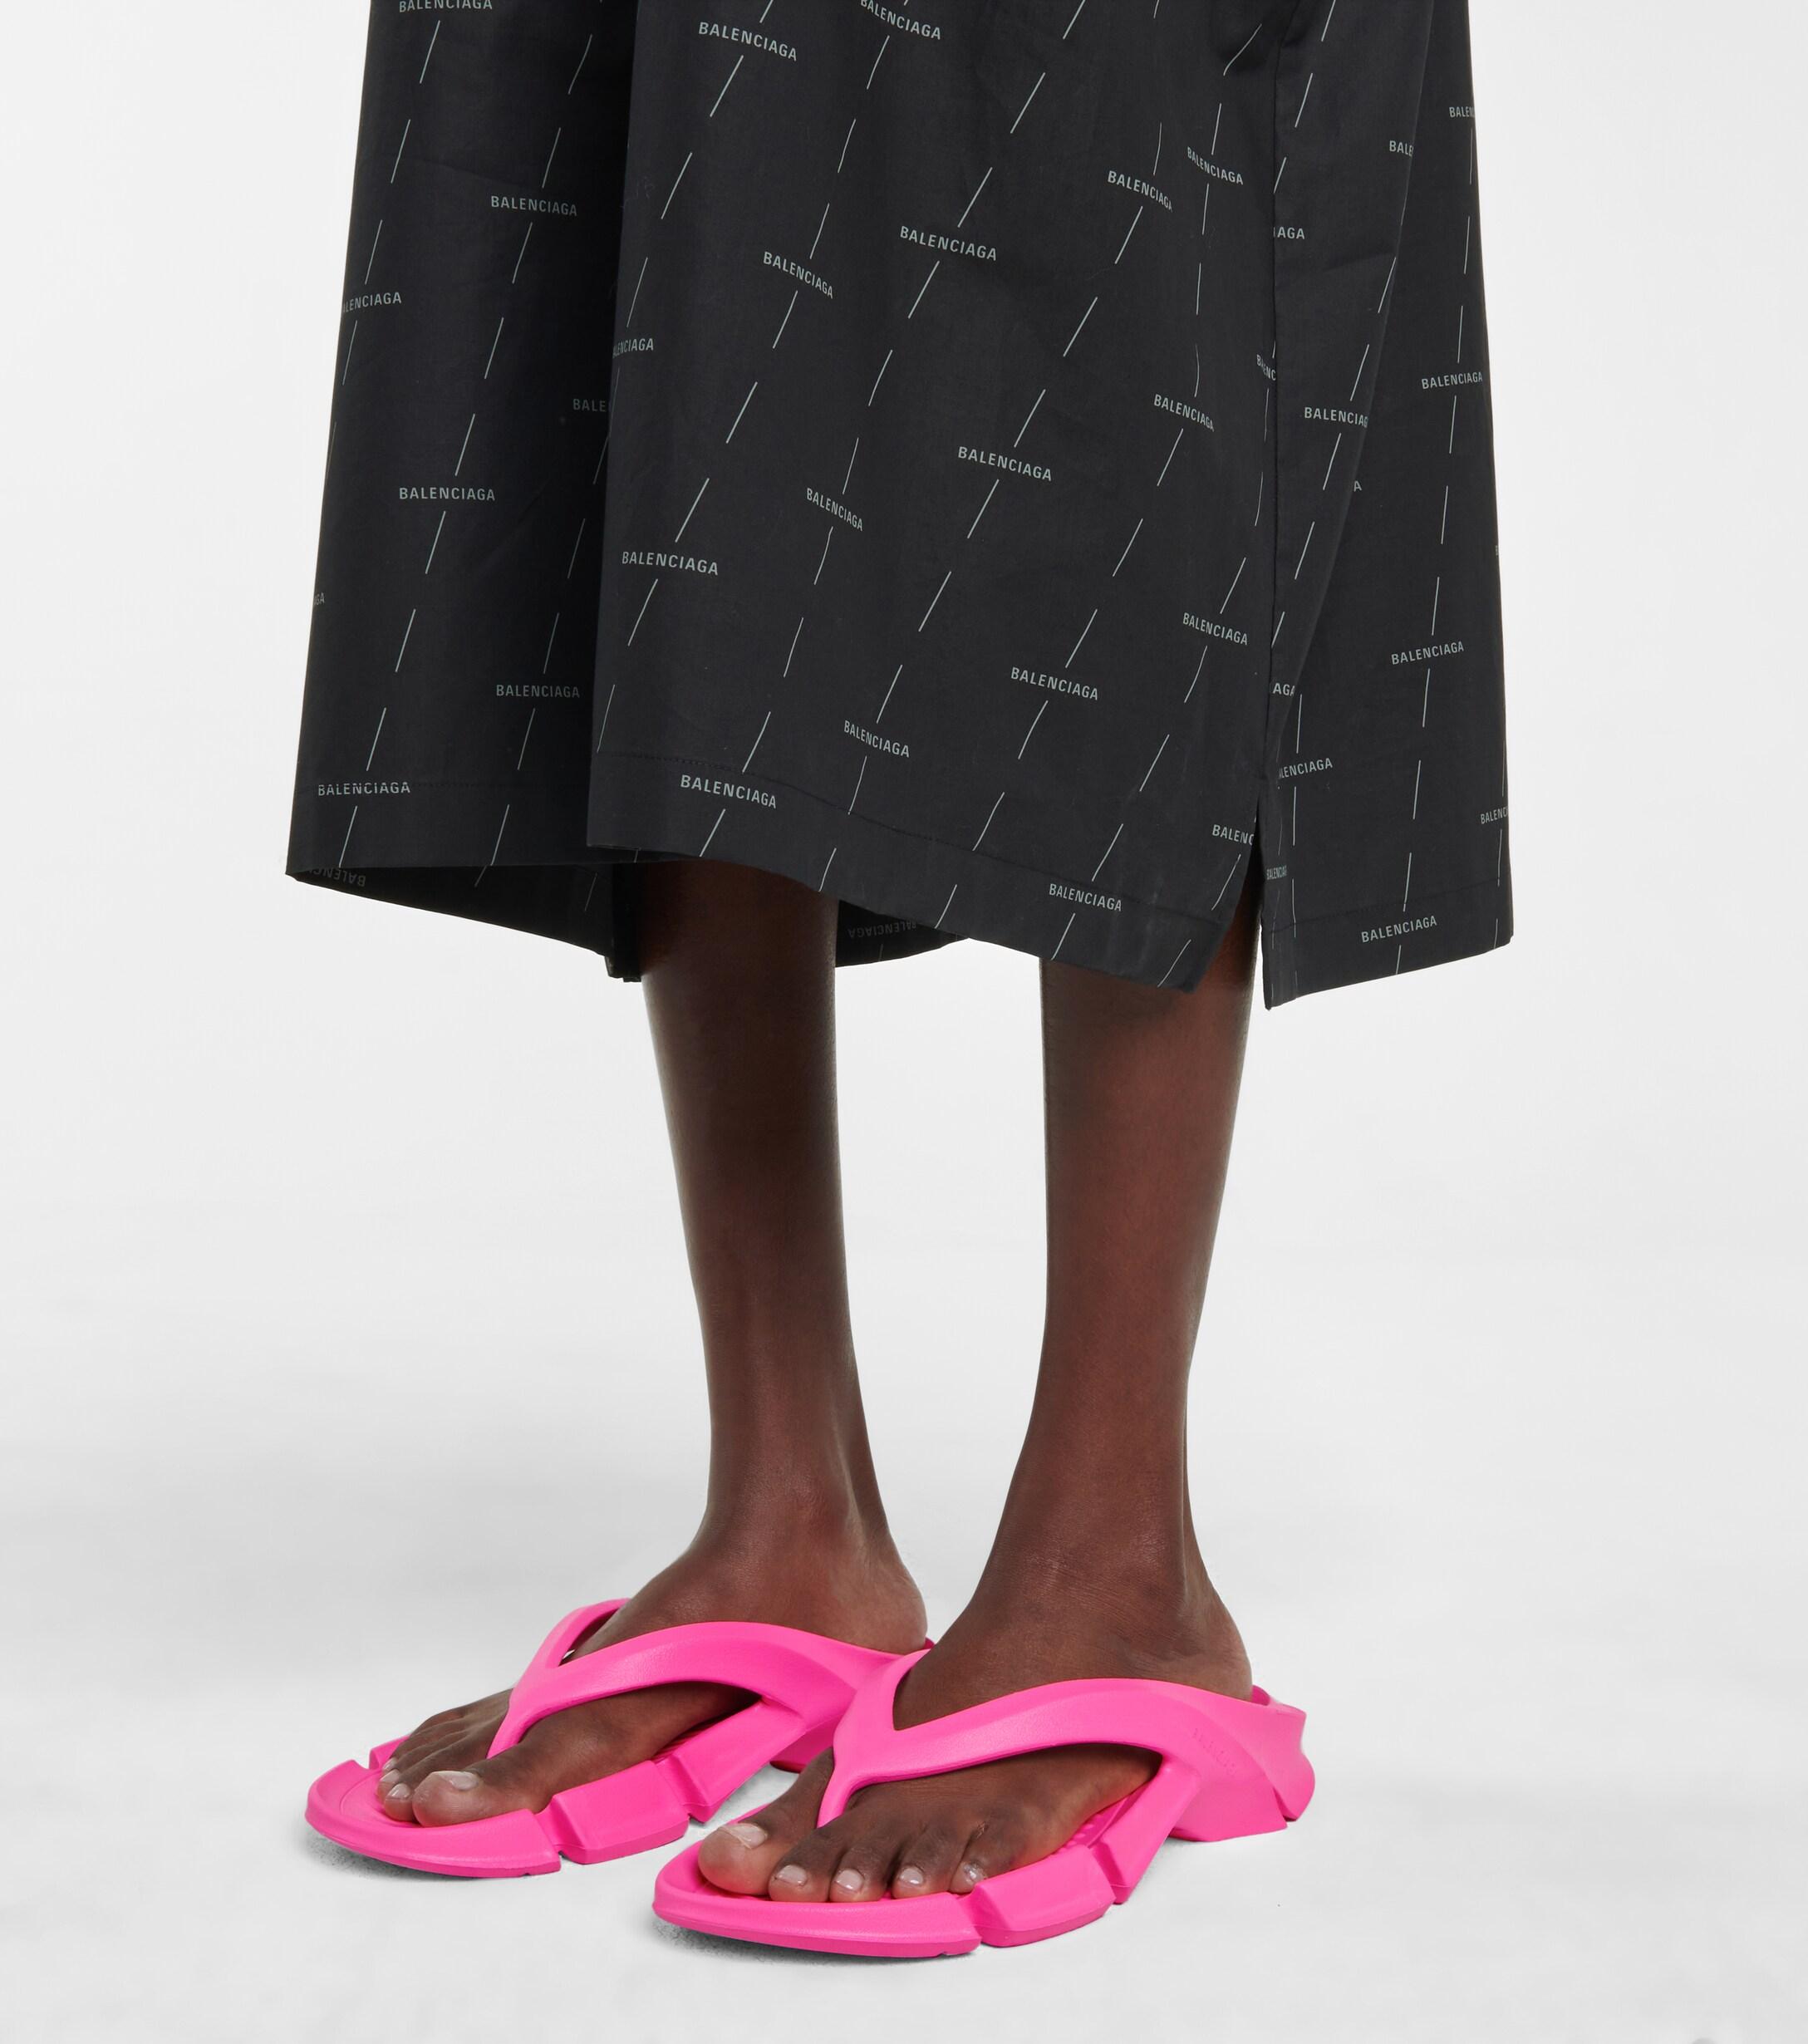 Balenciaga Mold Thong Sandals in Pink | Lyst